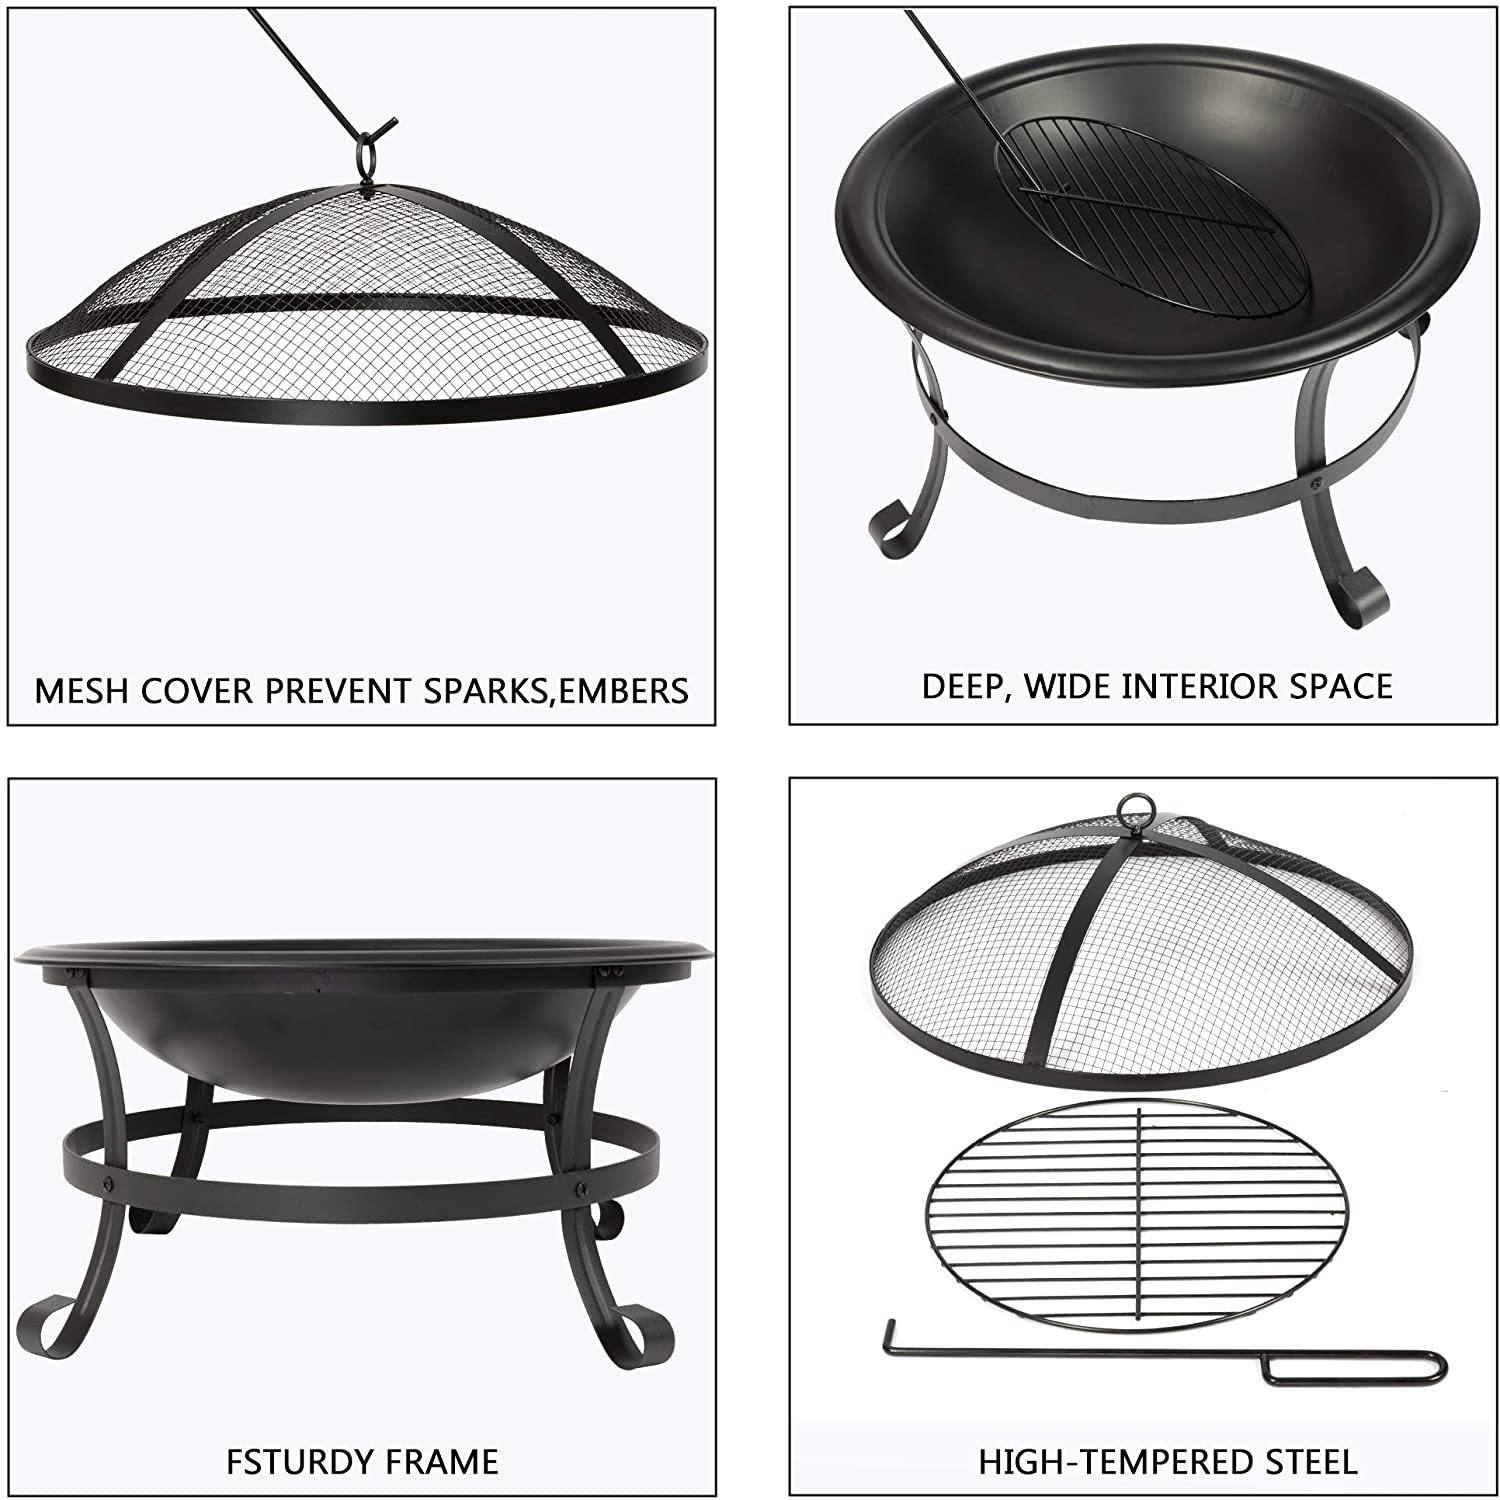 Outdoor Wood Burning BBQ Grill Firepit